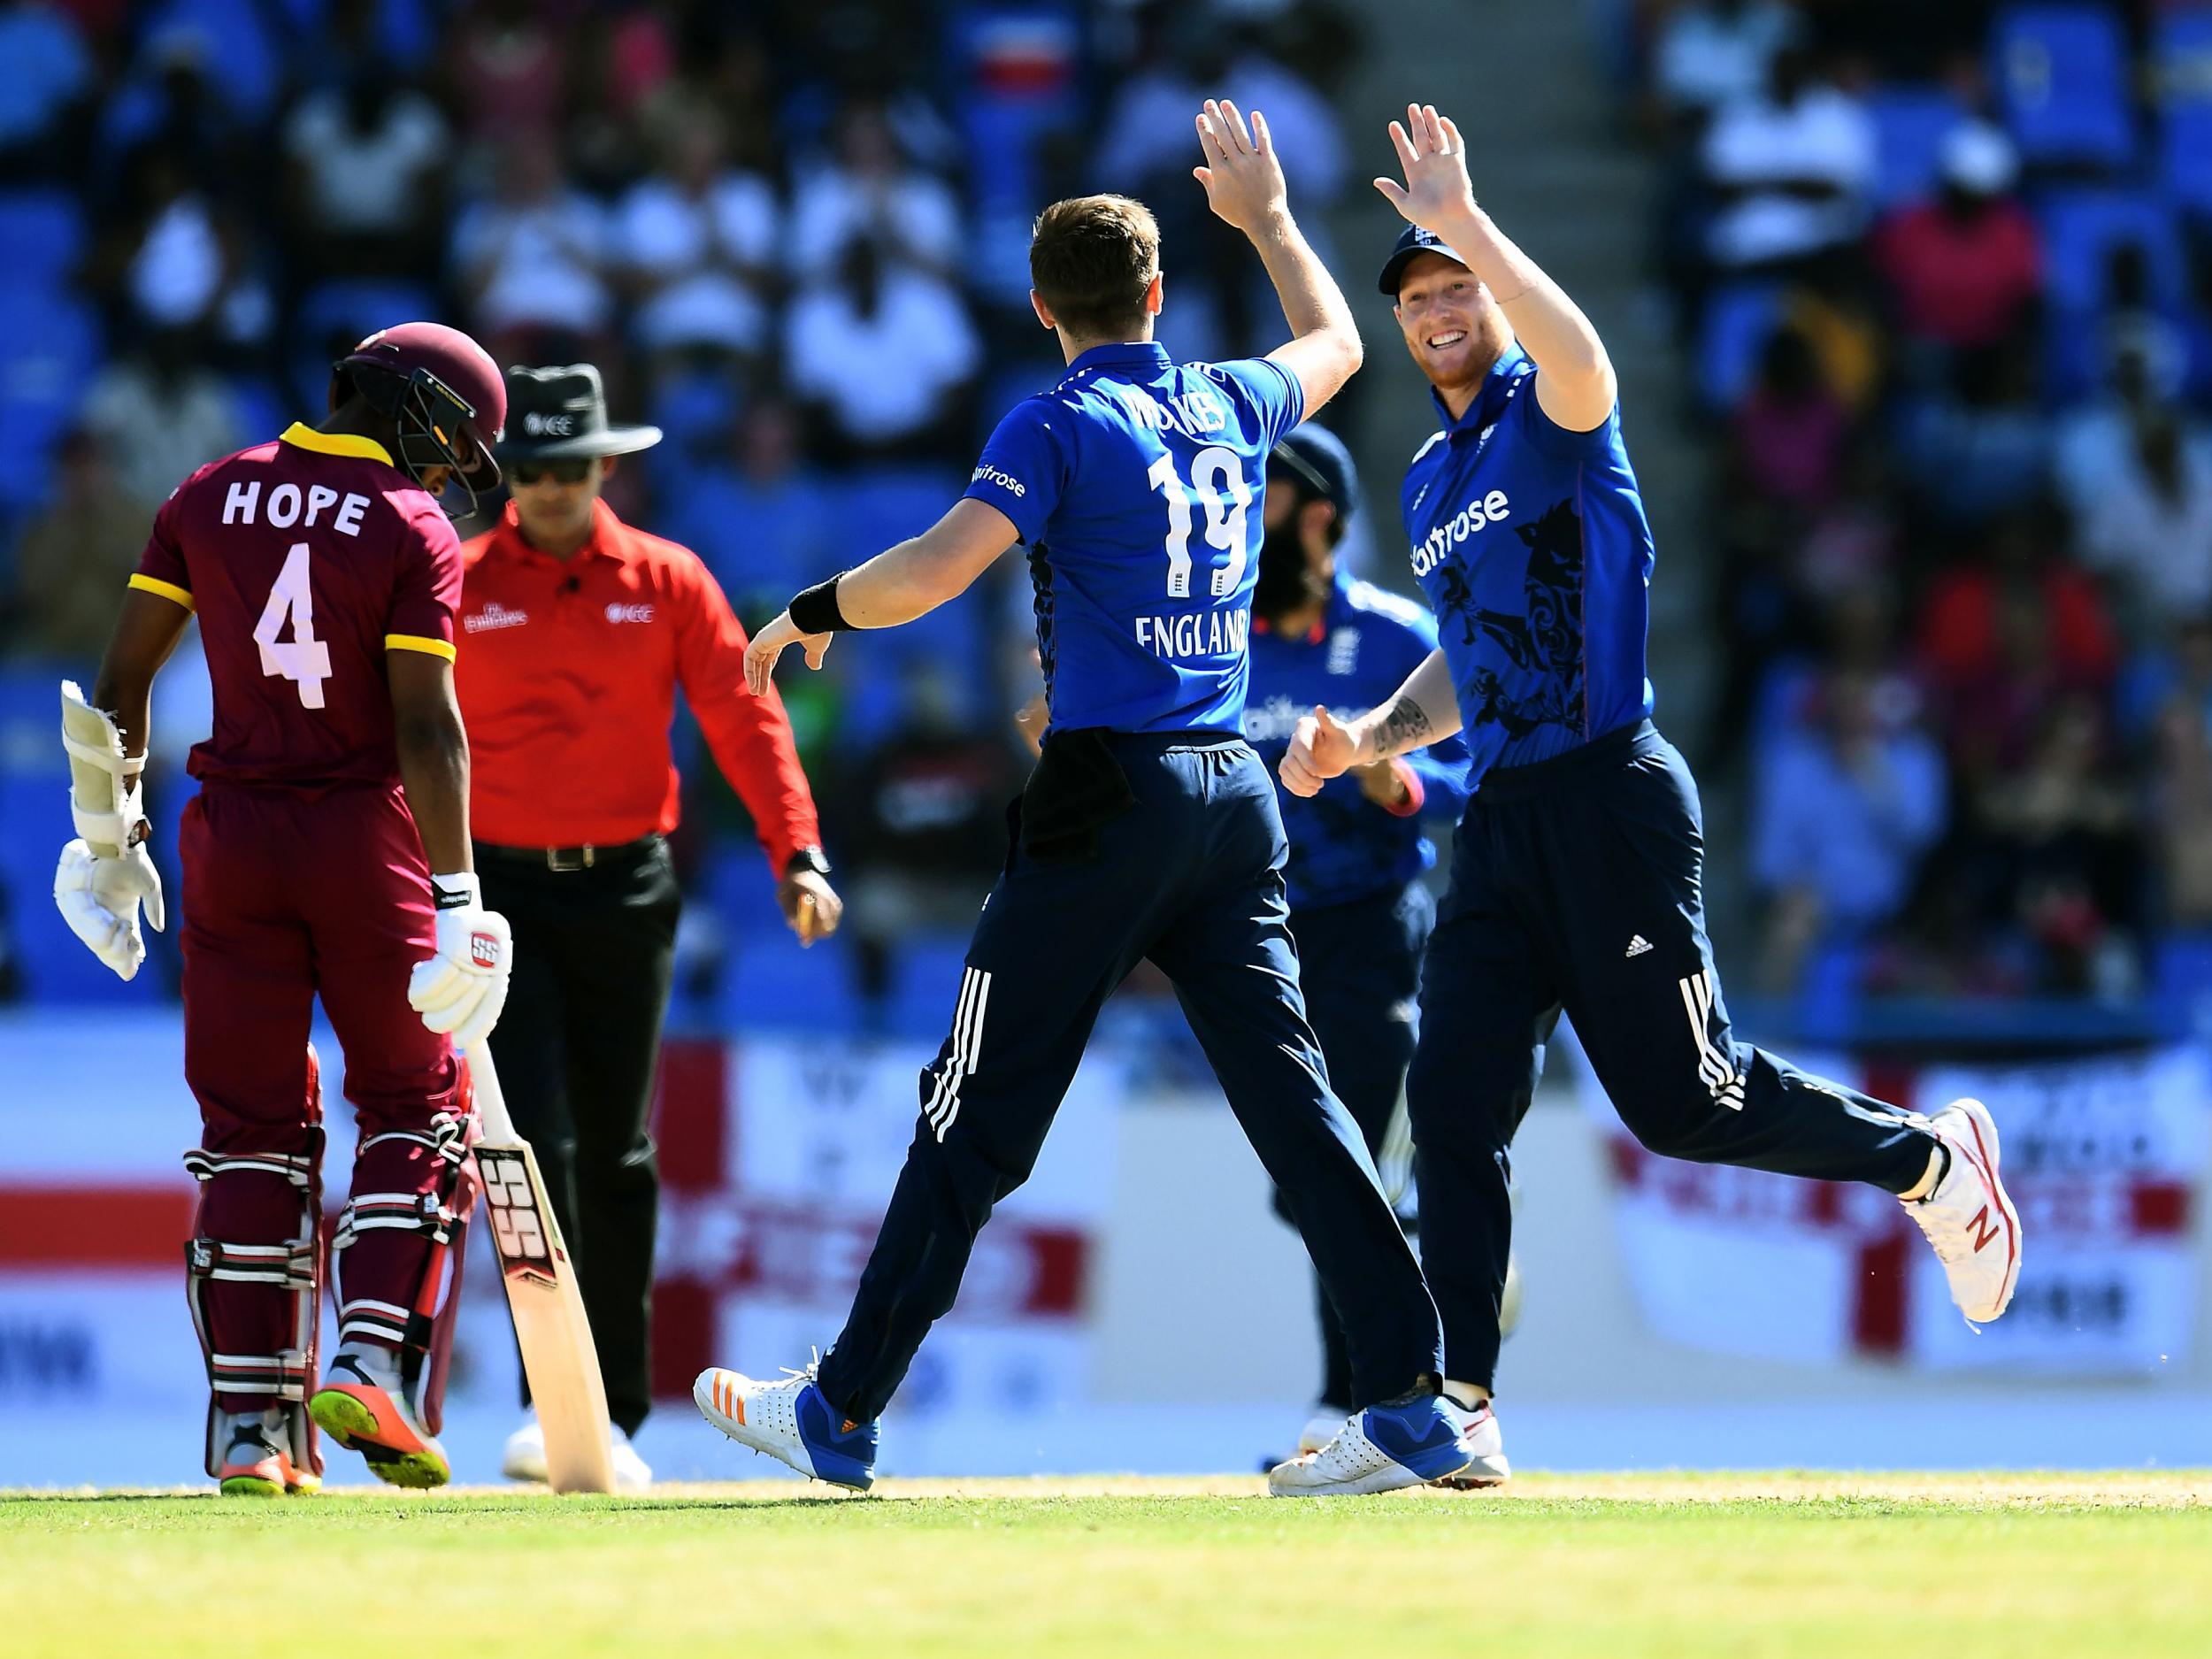 &#13;
Woakes is congratulated by Stokes after yet another wicket &#13;